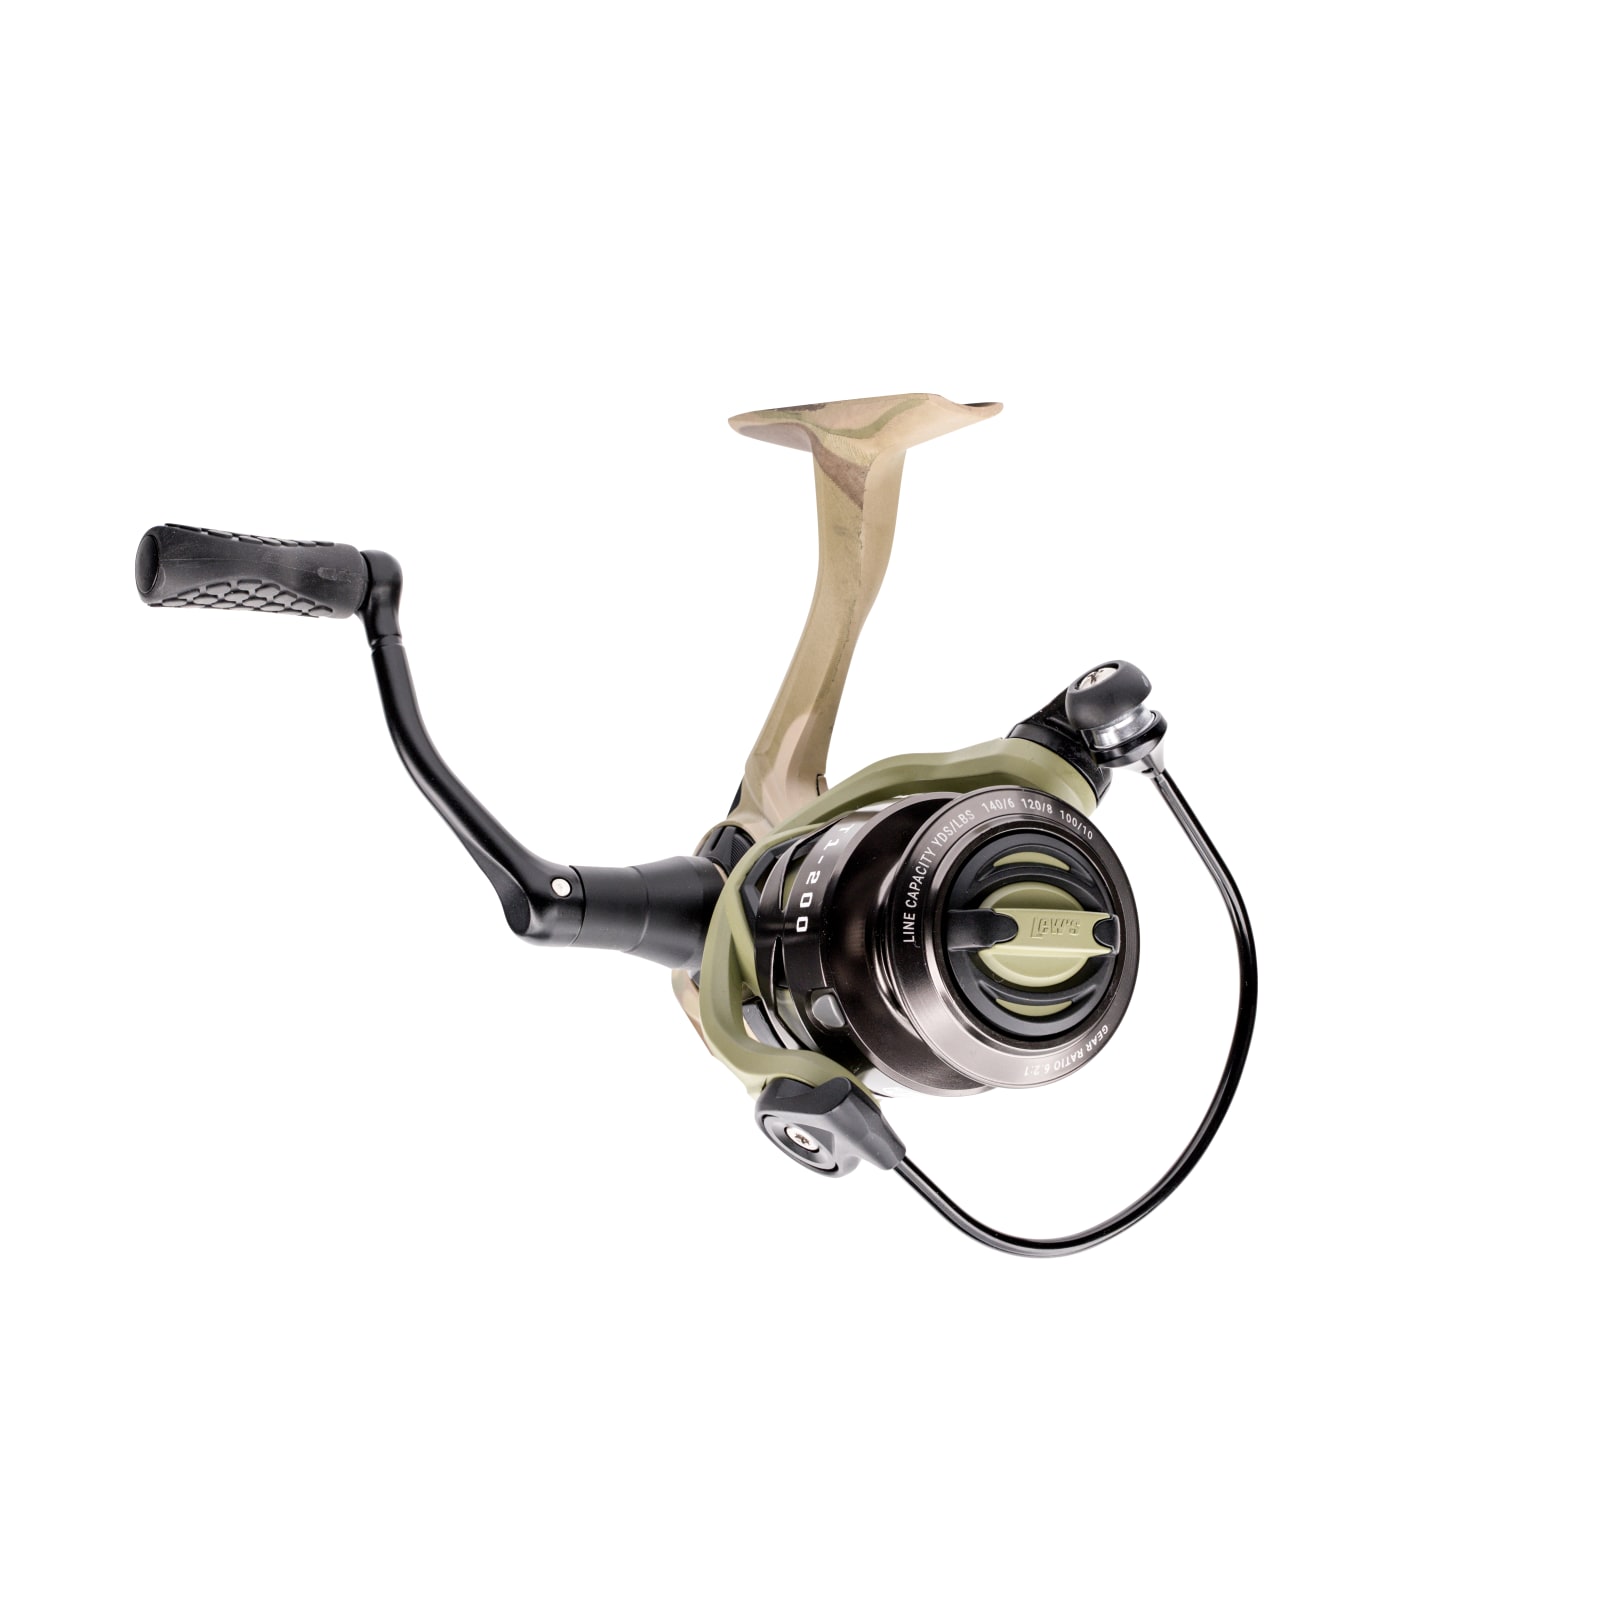 Size 200 Multicam American Hero Tier 1 Spinning Reel by Lew's at